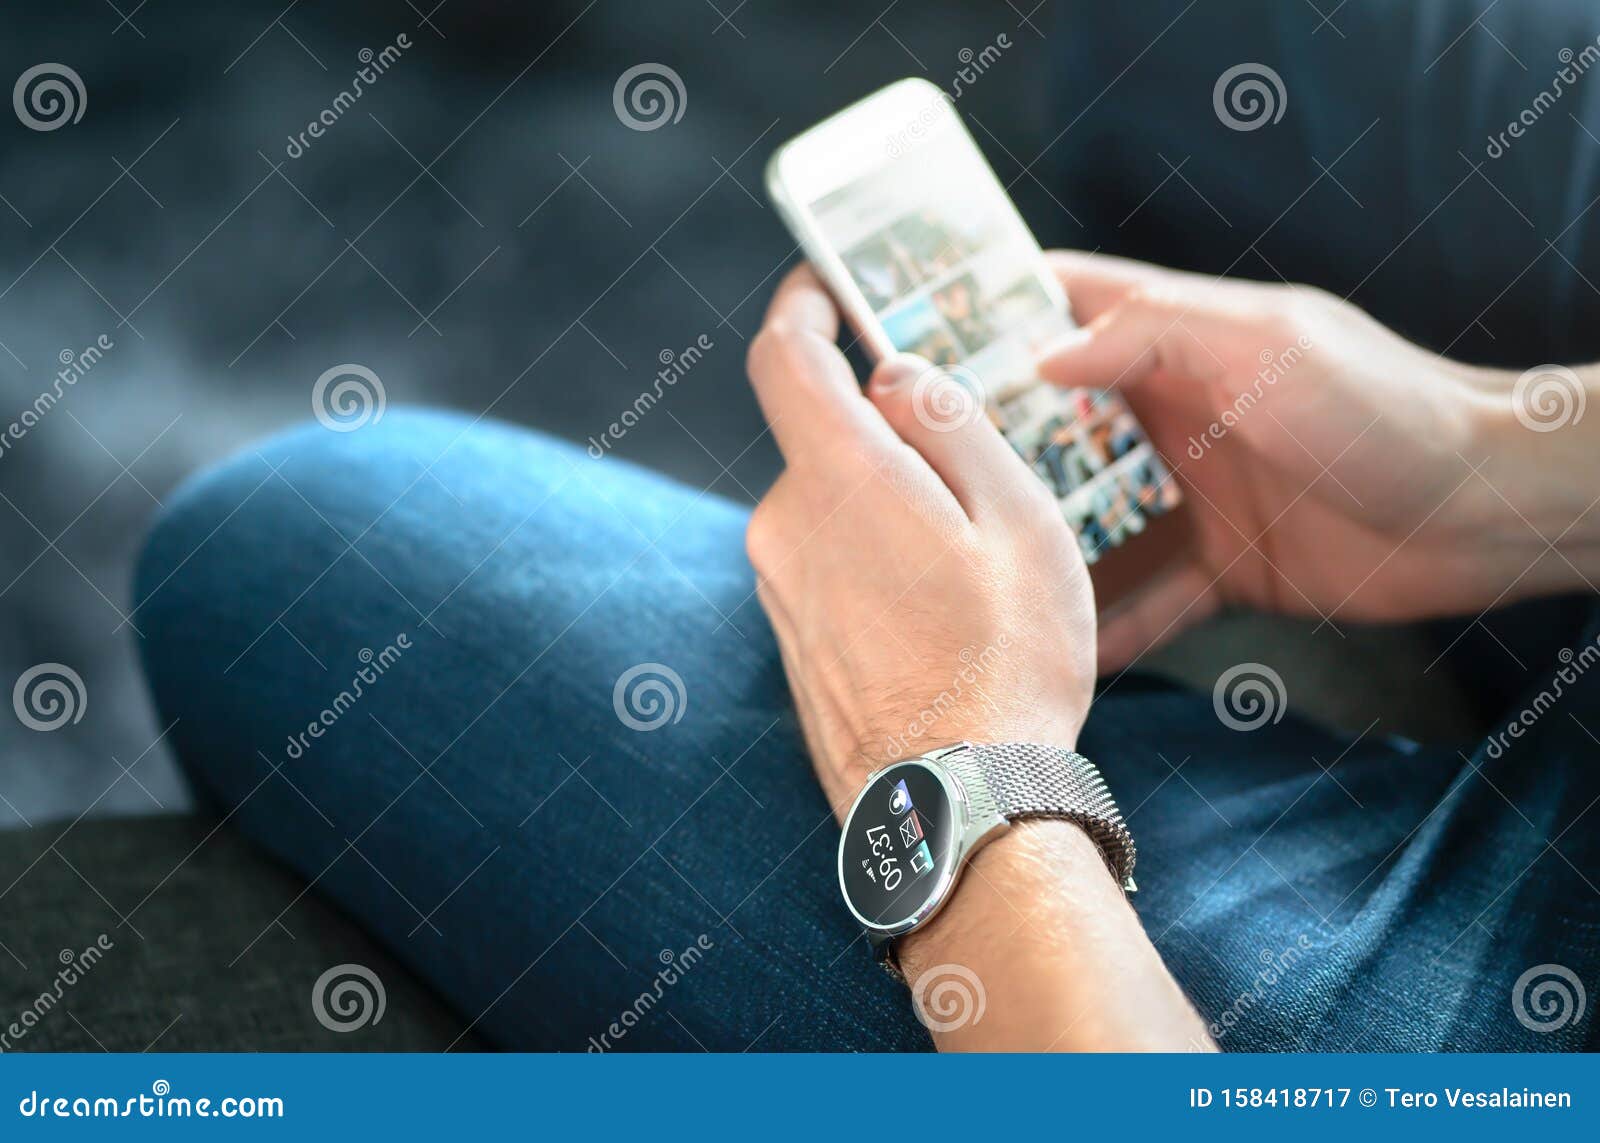 wireless connection between smart watch and mobile phone. man using wearable gadget and digital app.